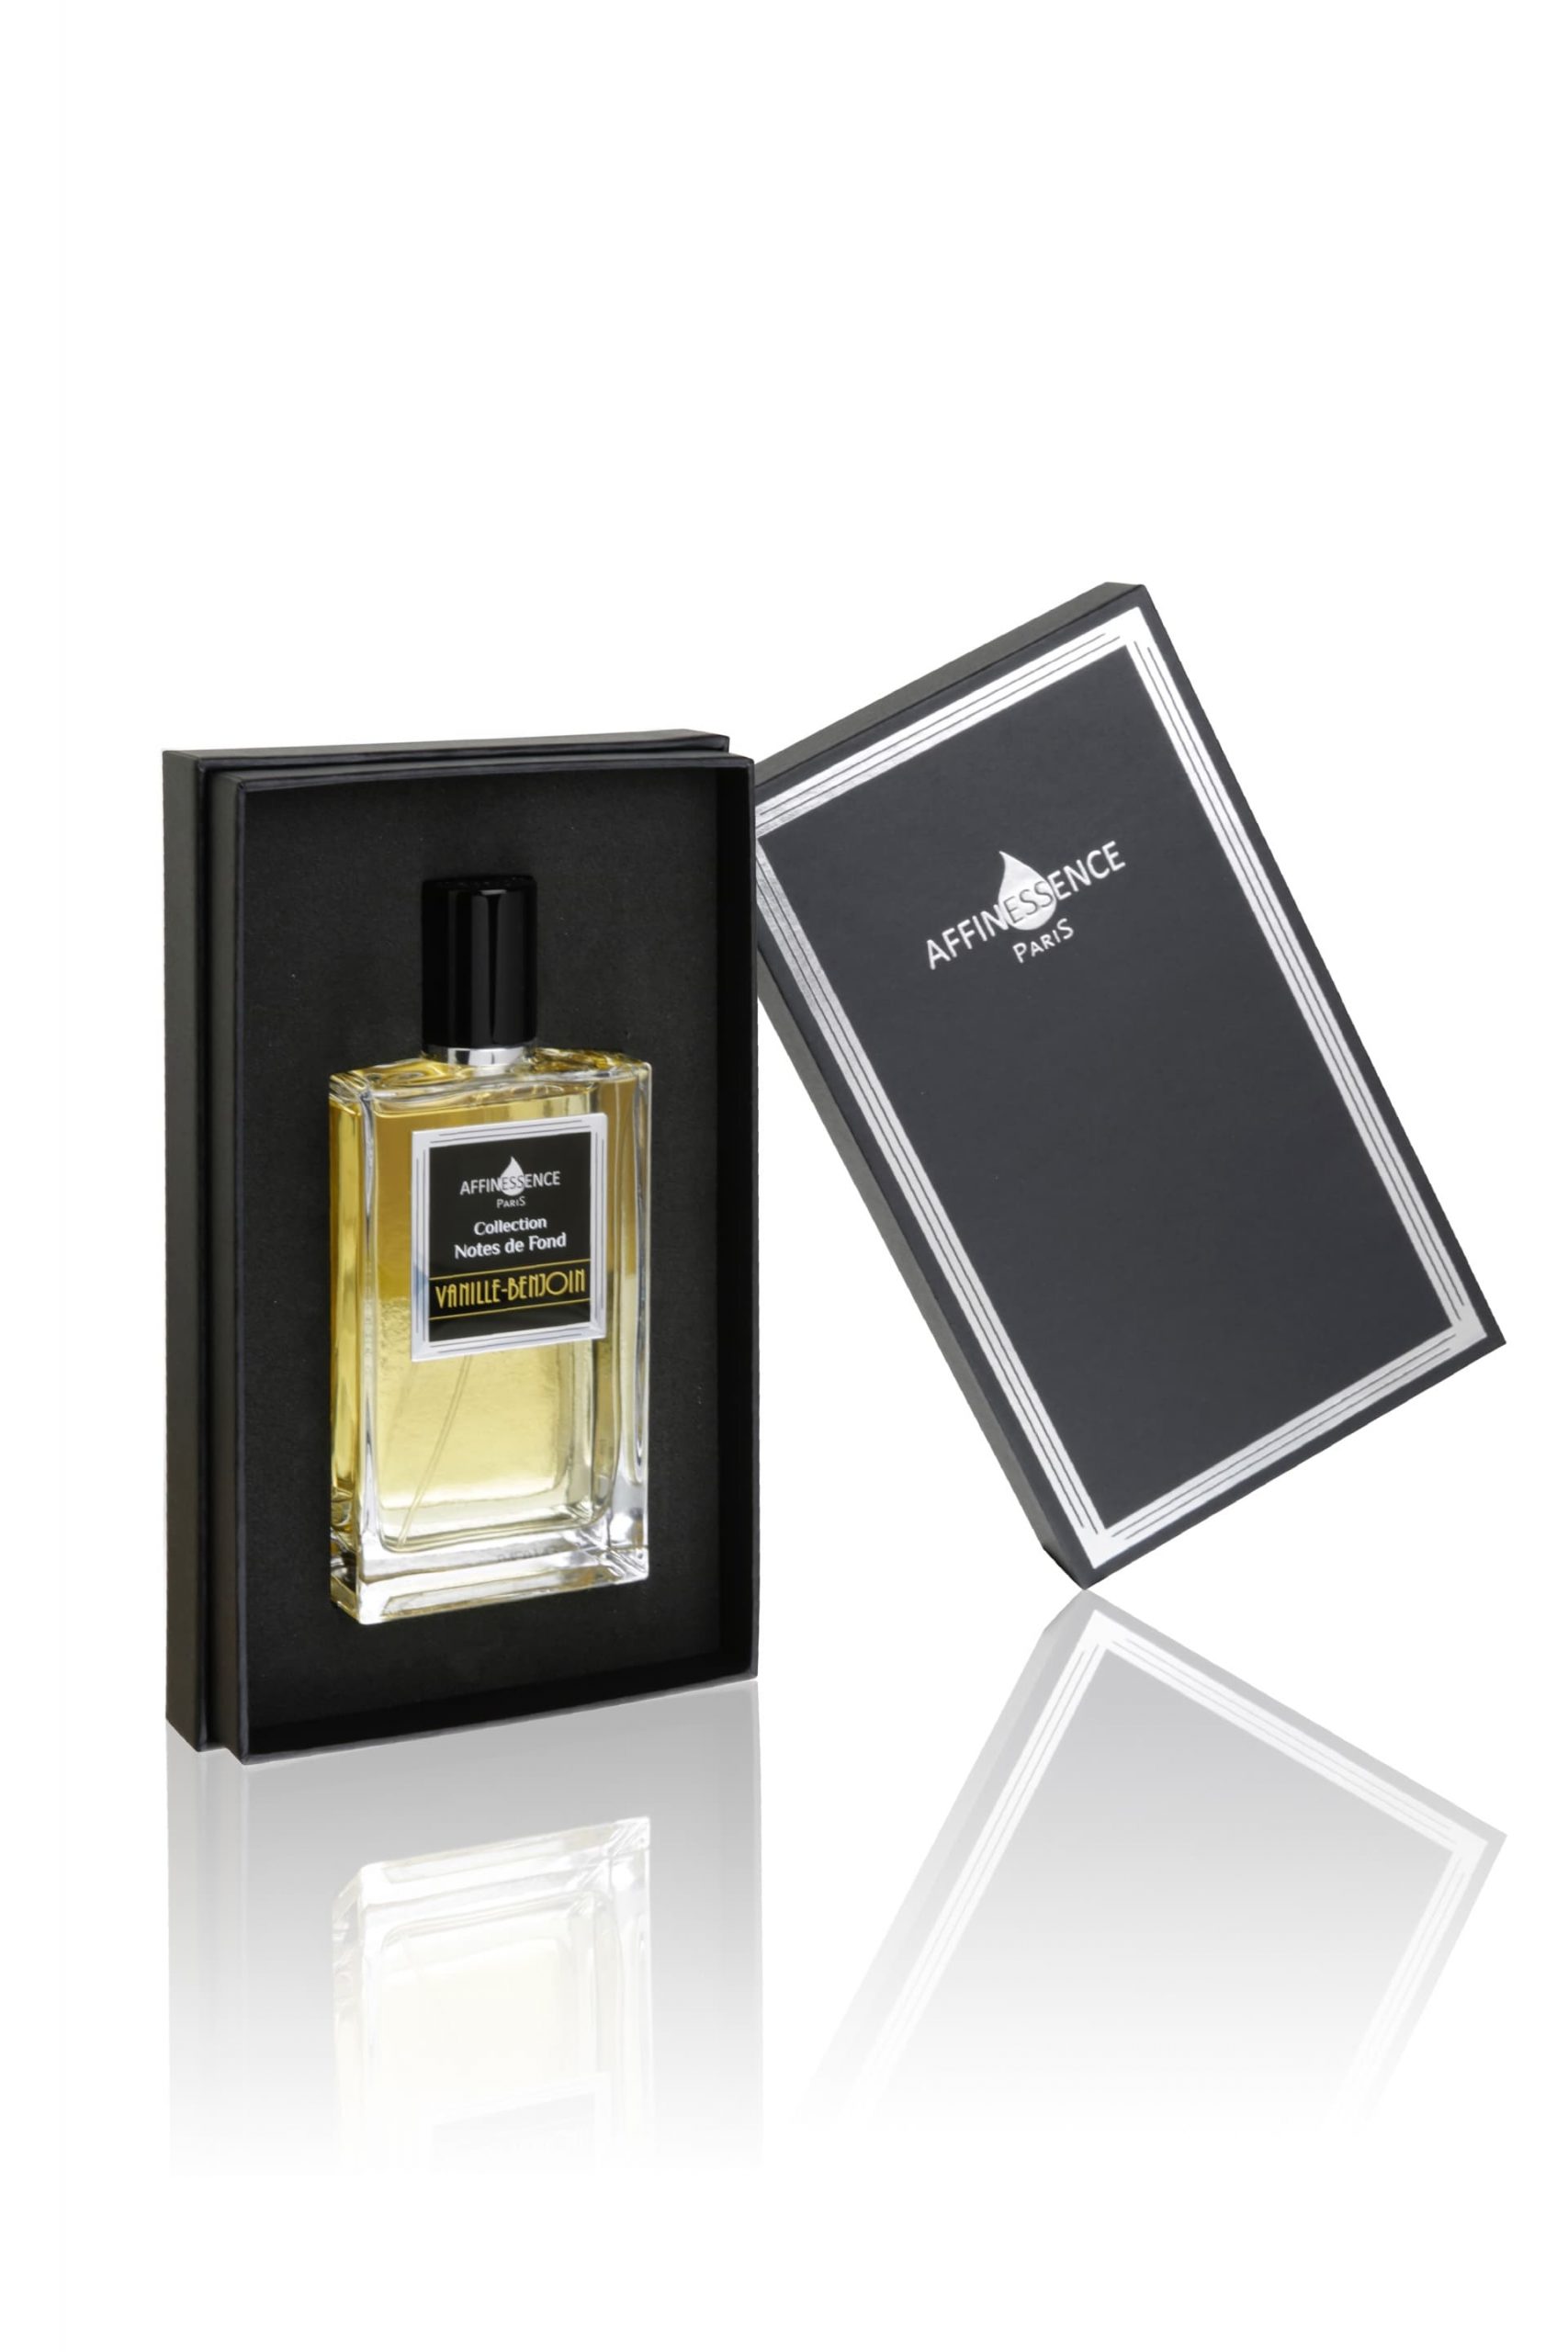 100ml-vanille-benjoin-classic-affinessence-scaled